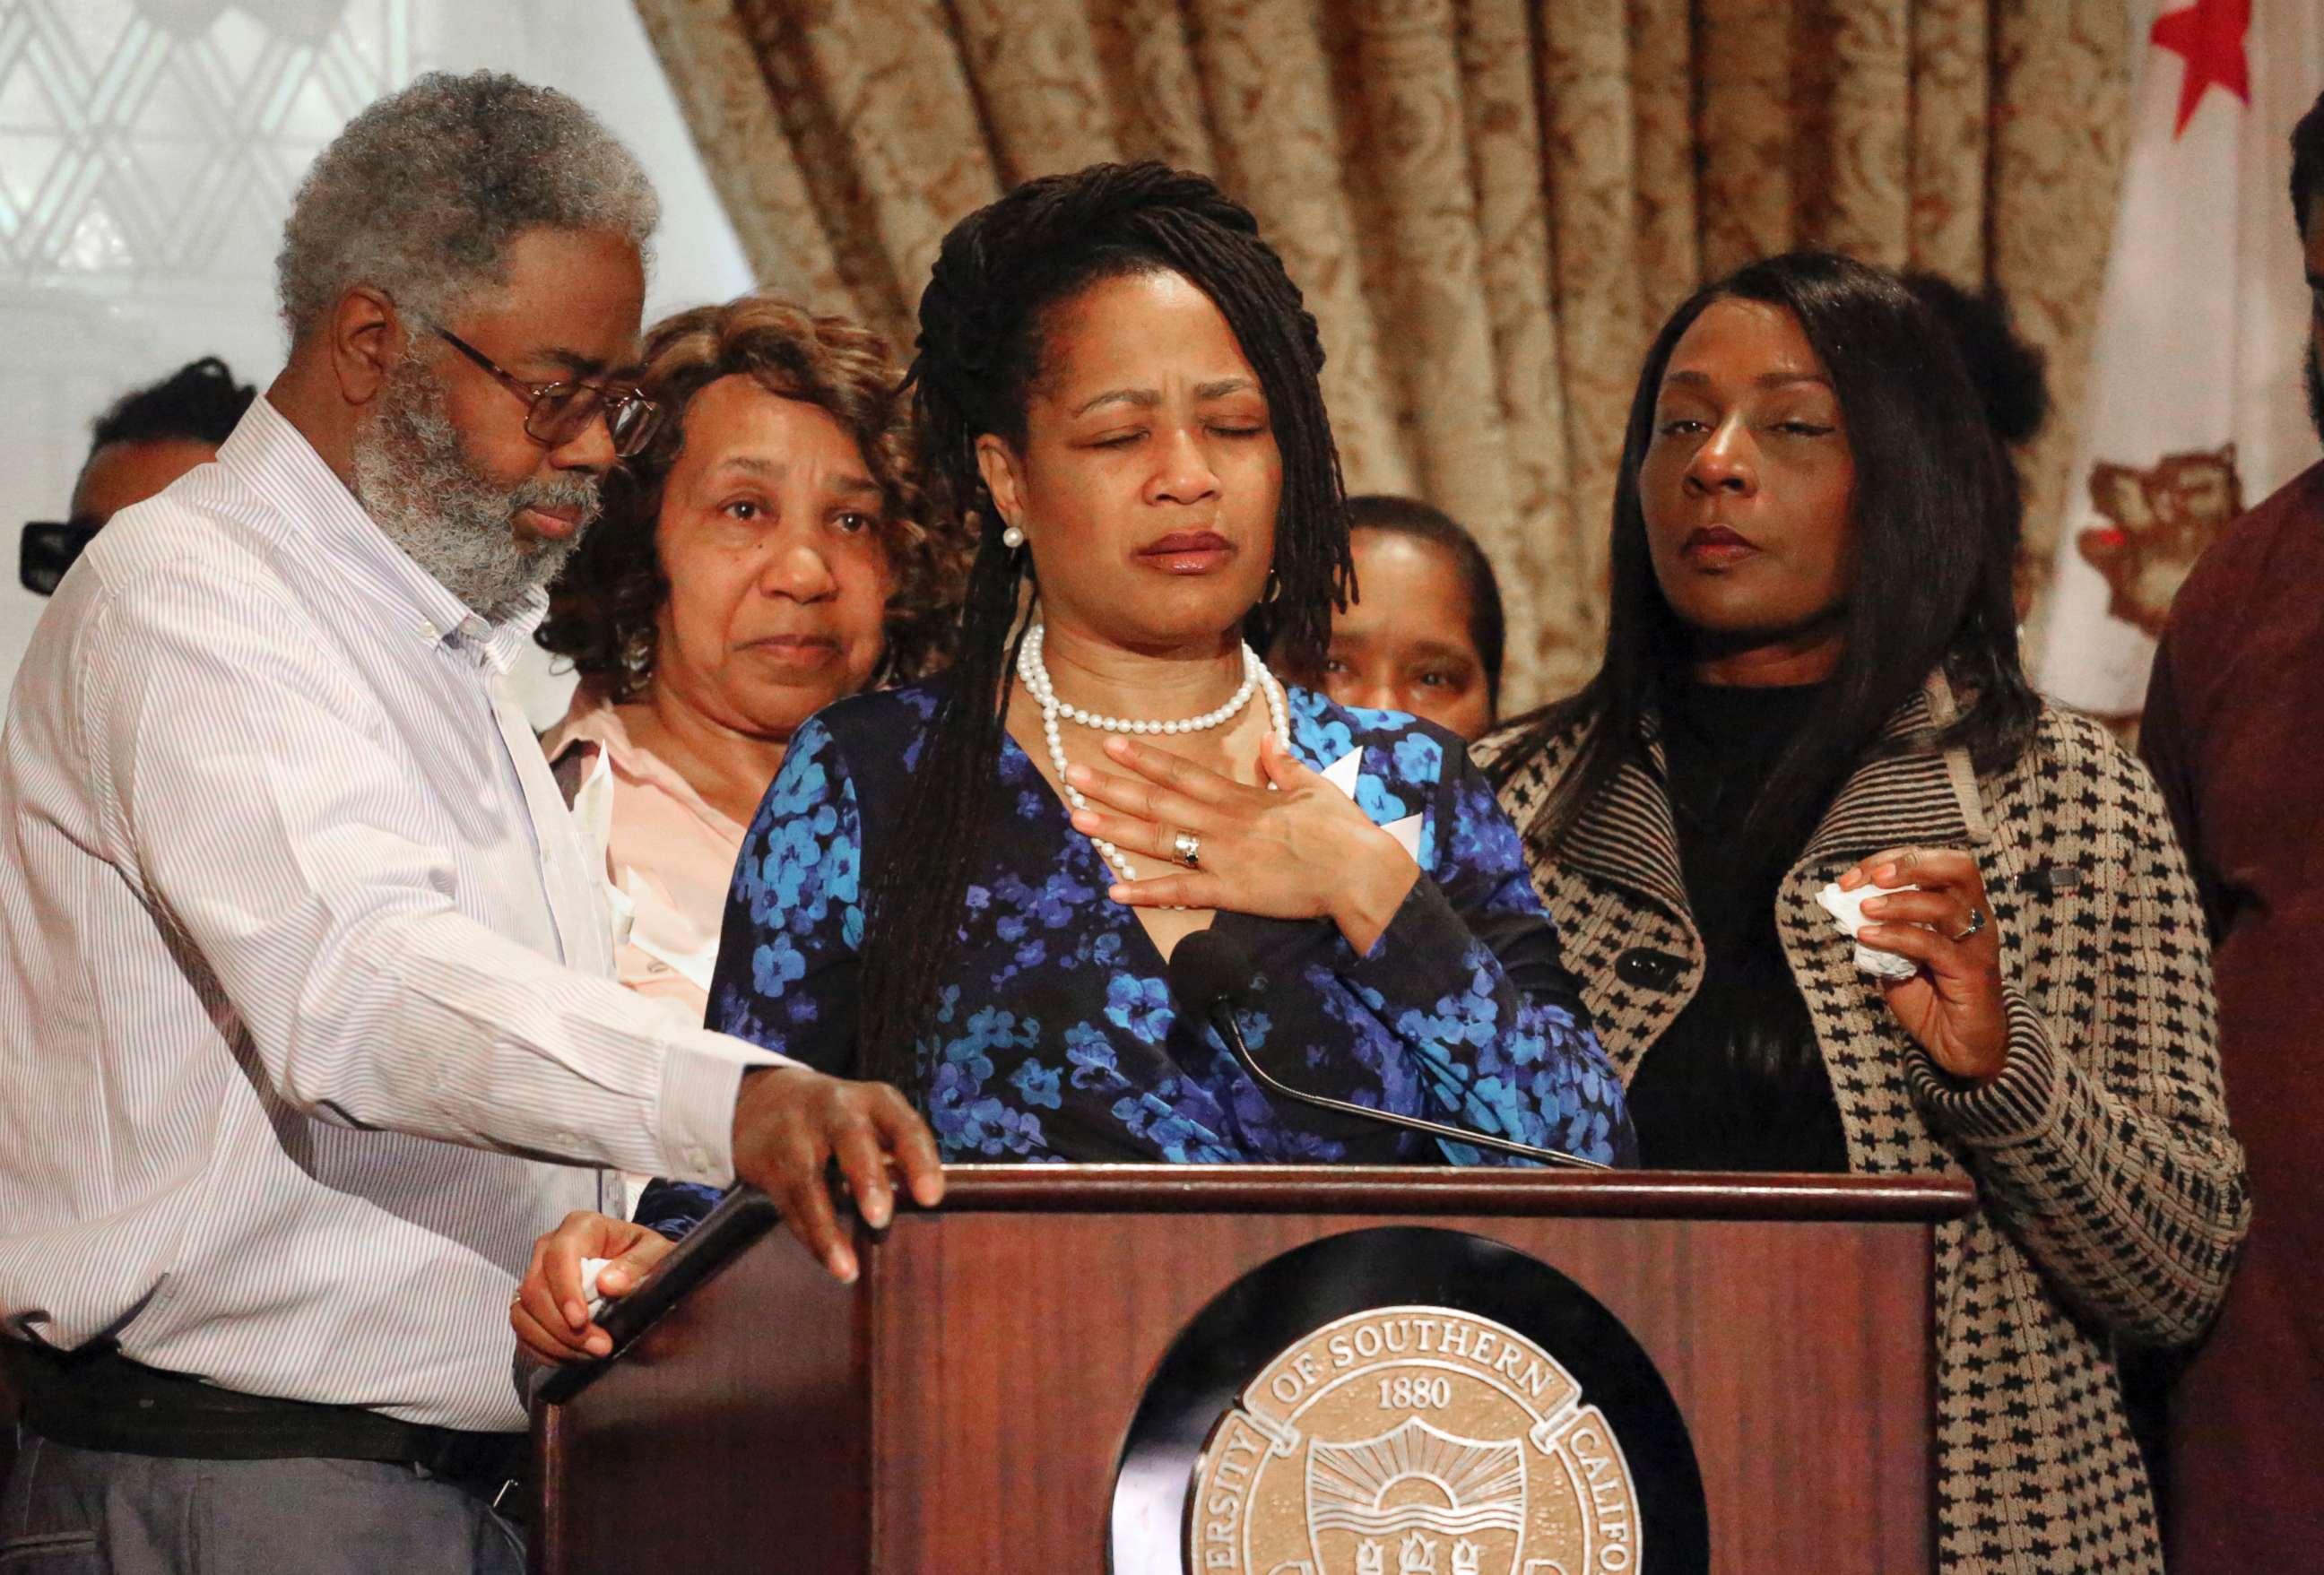 PHOTO: Oakland City Councilwoman Lynette McElhaney, the mother of Victor McElhaney, 21, a student killed Sunday, March 10, 2019, during an attempted robbery, talks about her son during a news conference on the USC campus in Los Angeles, March 12, 2019.